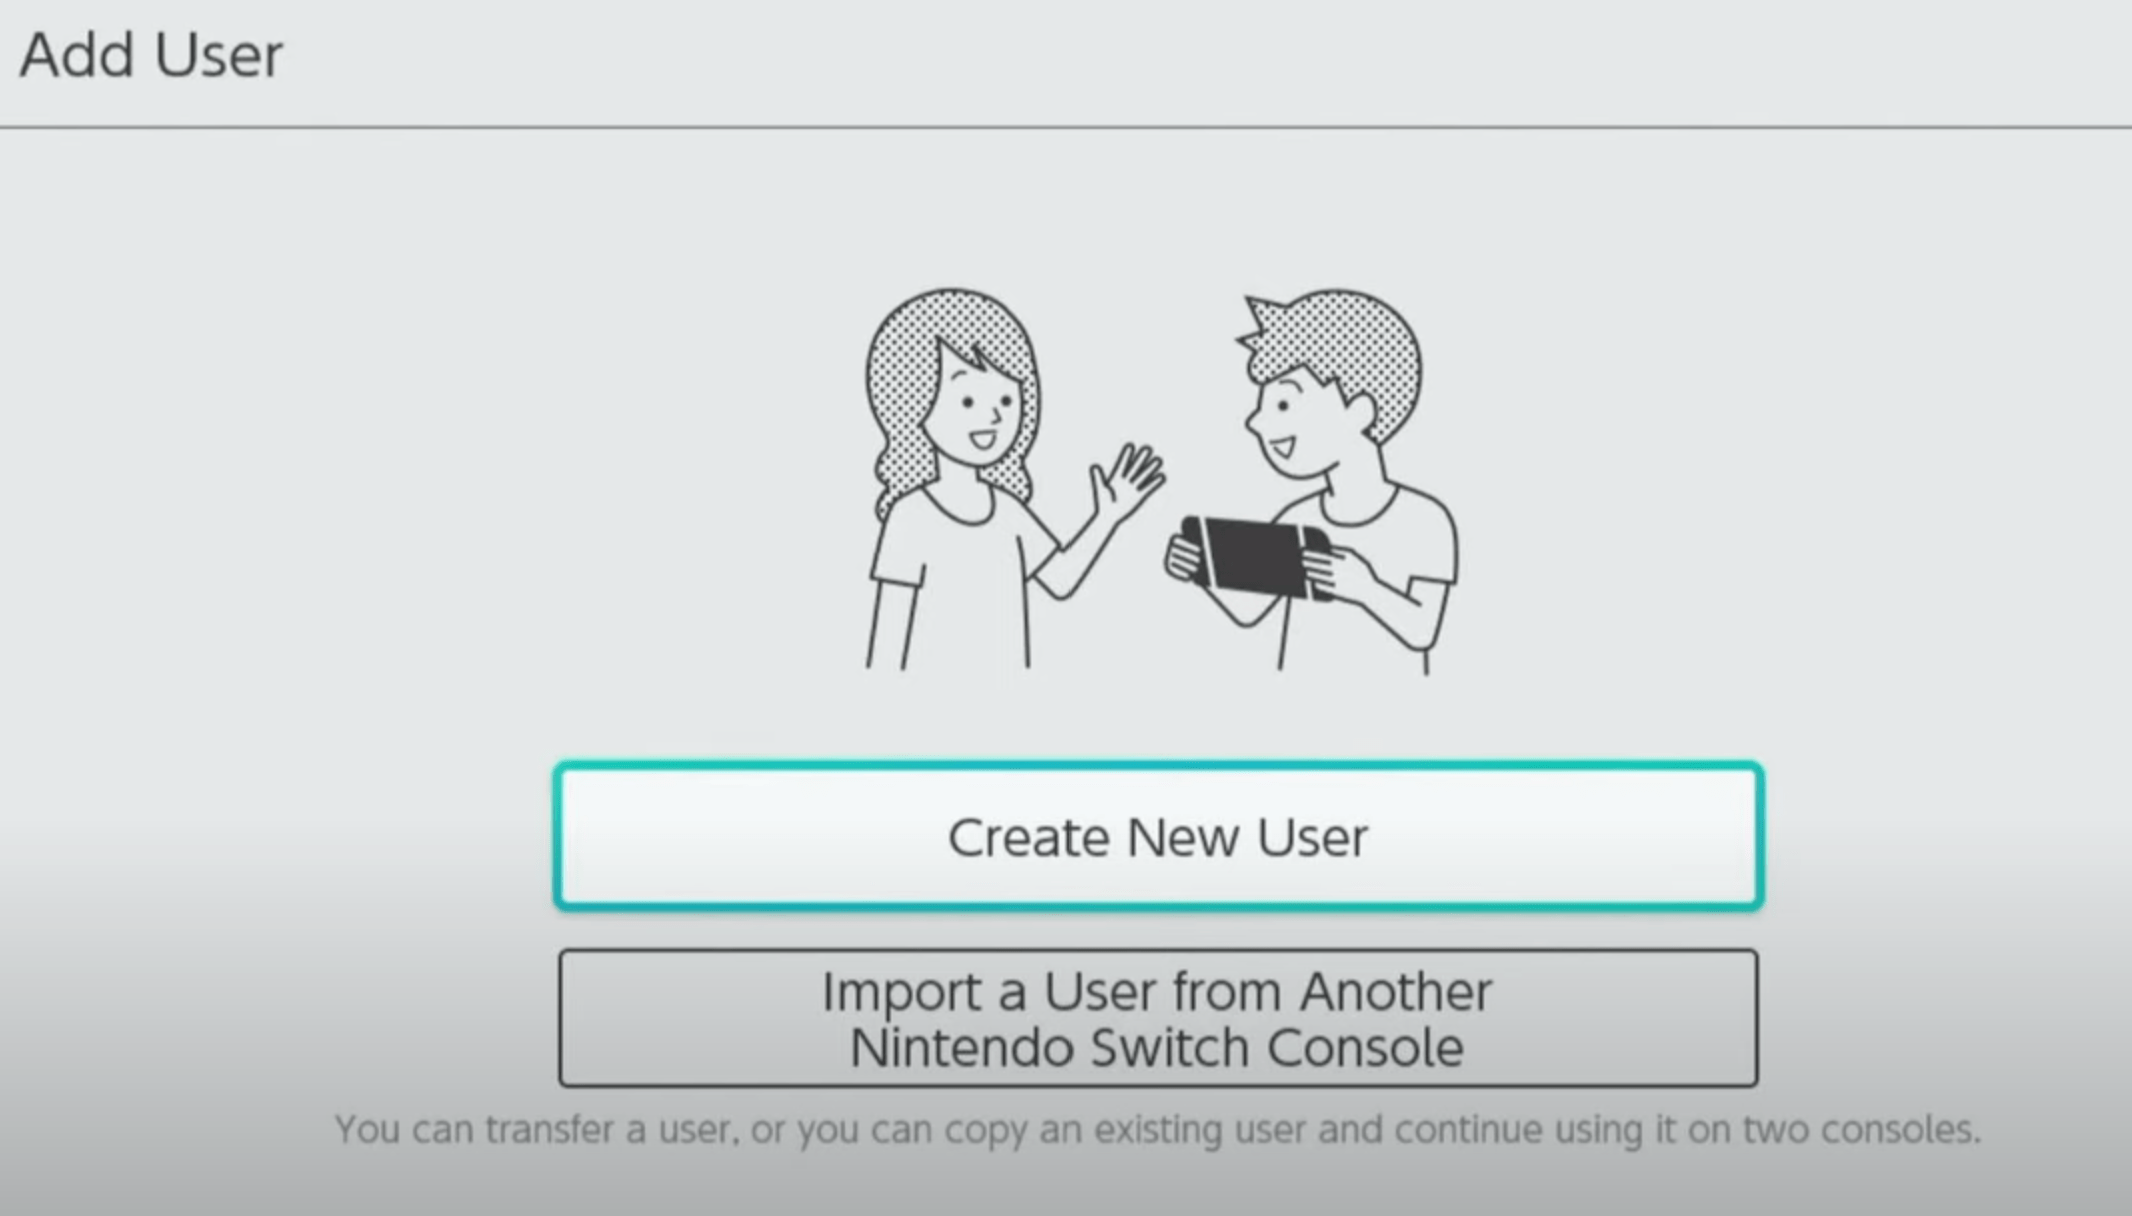 How To Add Child Account for Nintendo Switch